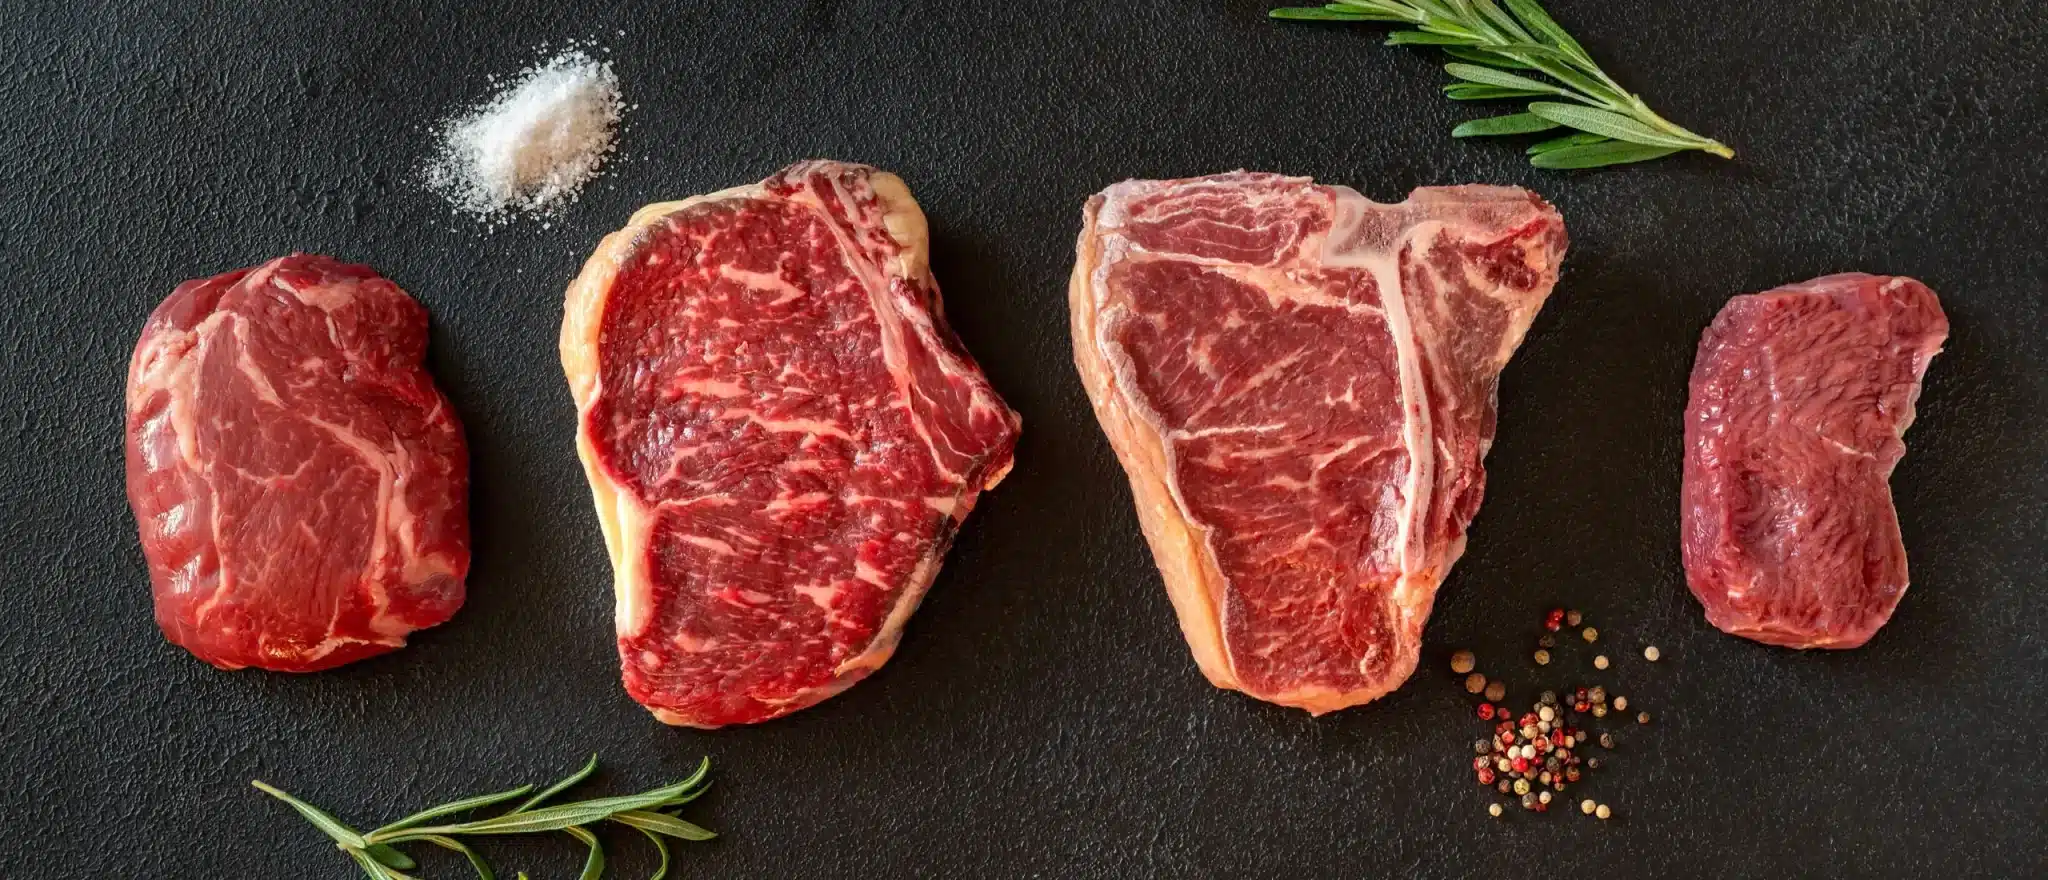 Ranking the Leanest (and Fattiest) Cuts of Steaks